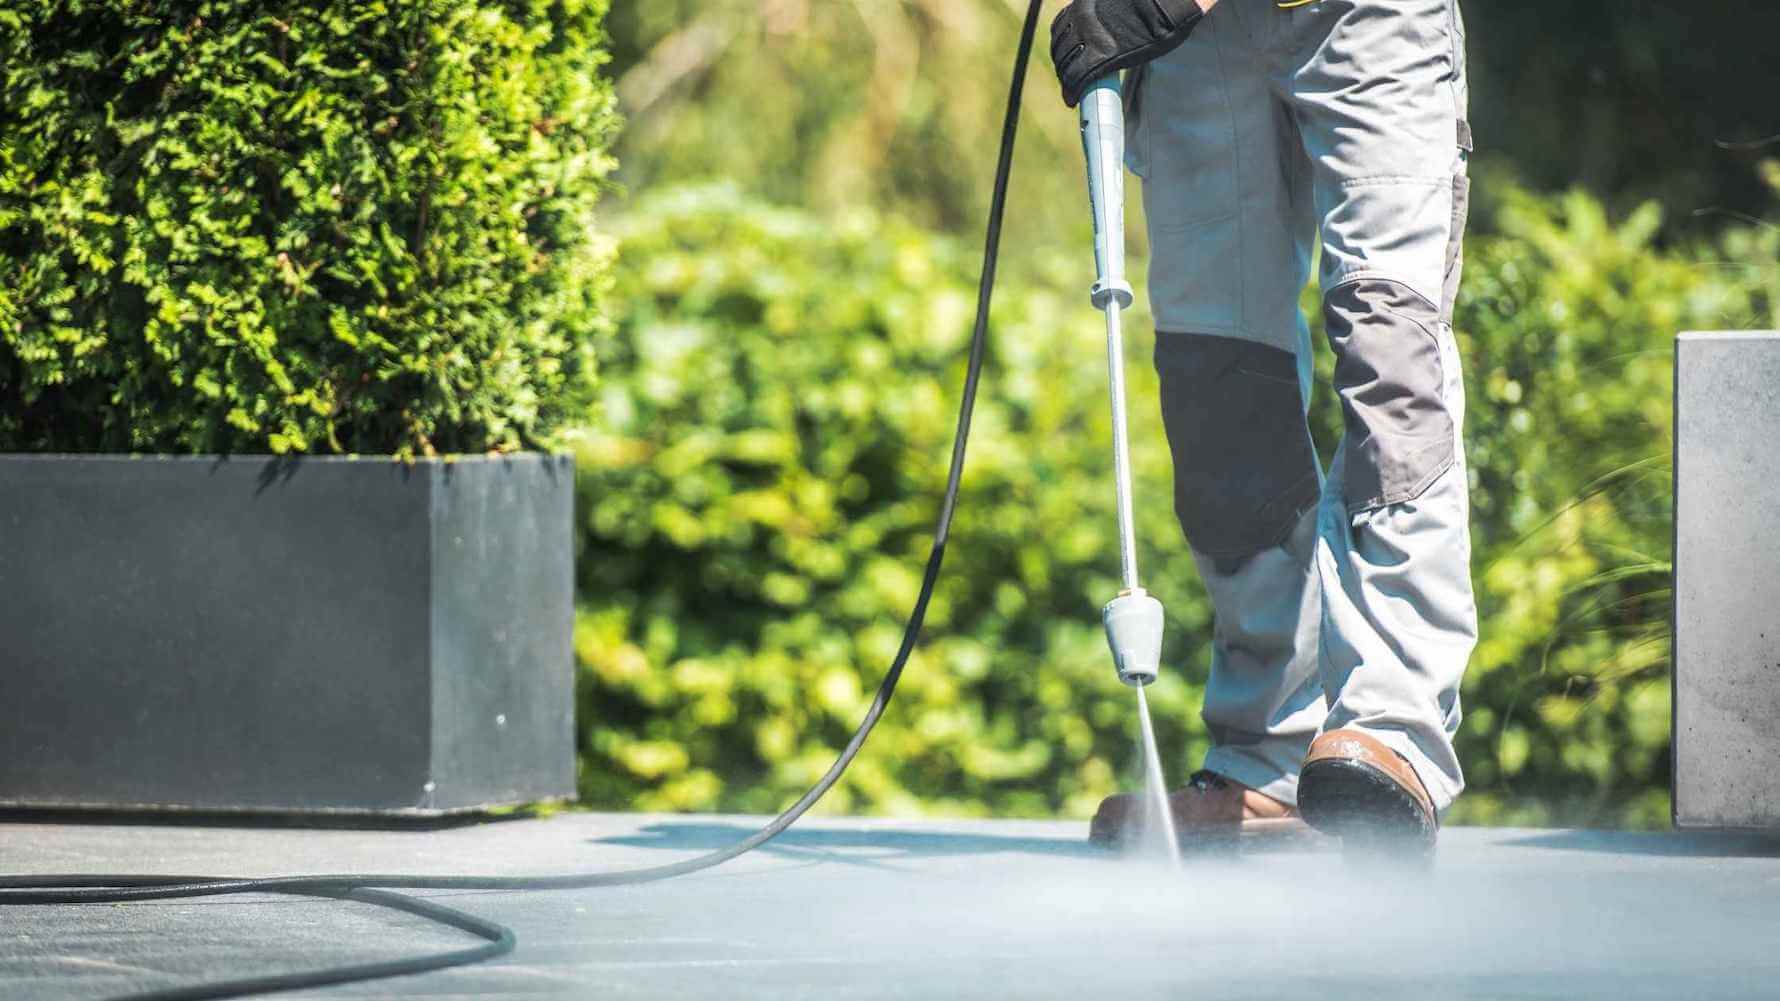 How to clean a concrete patio with a pressure washer. Photo os a person cleaning a concrete patio with a pressure washer.